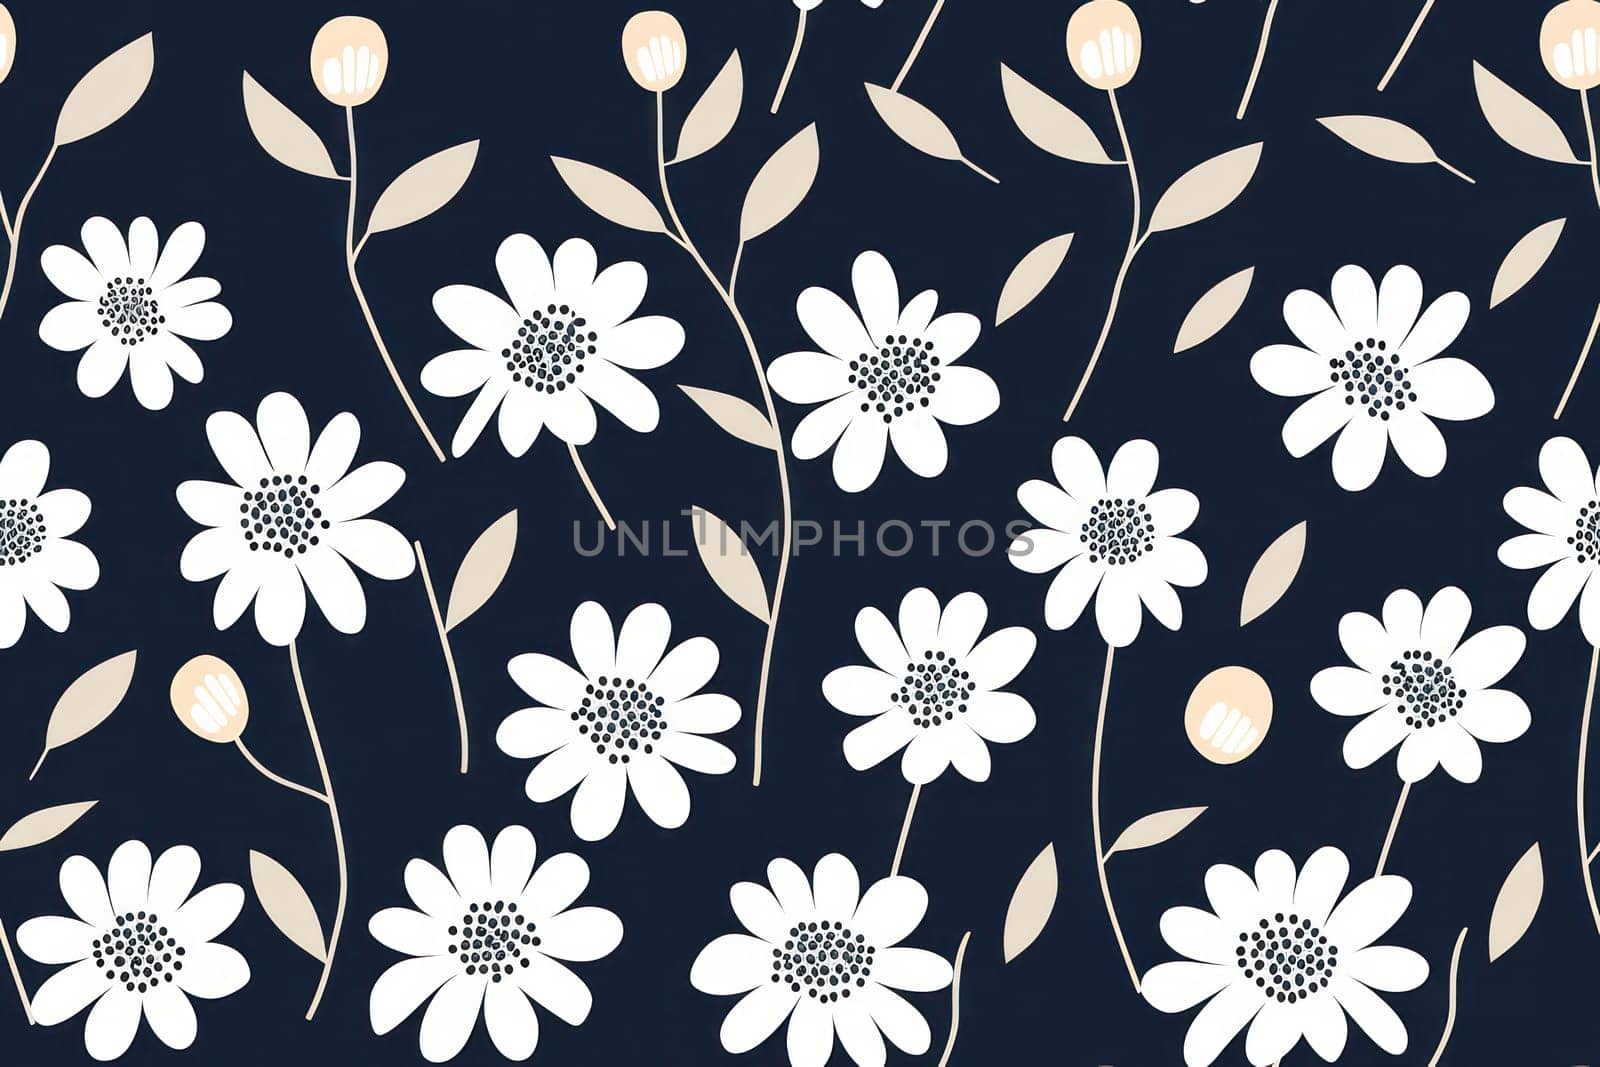 Seamless Floral Summer Retro Wallpaper Pattern with Blue Daisy Blossoms on White Background